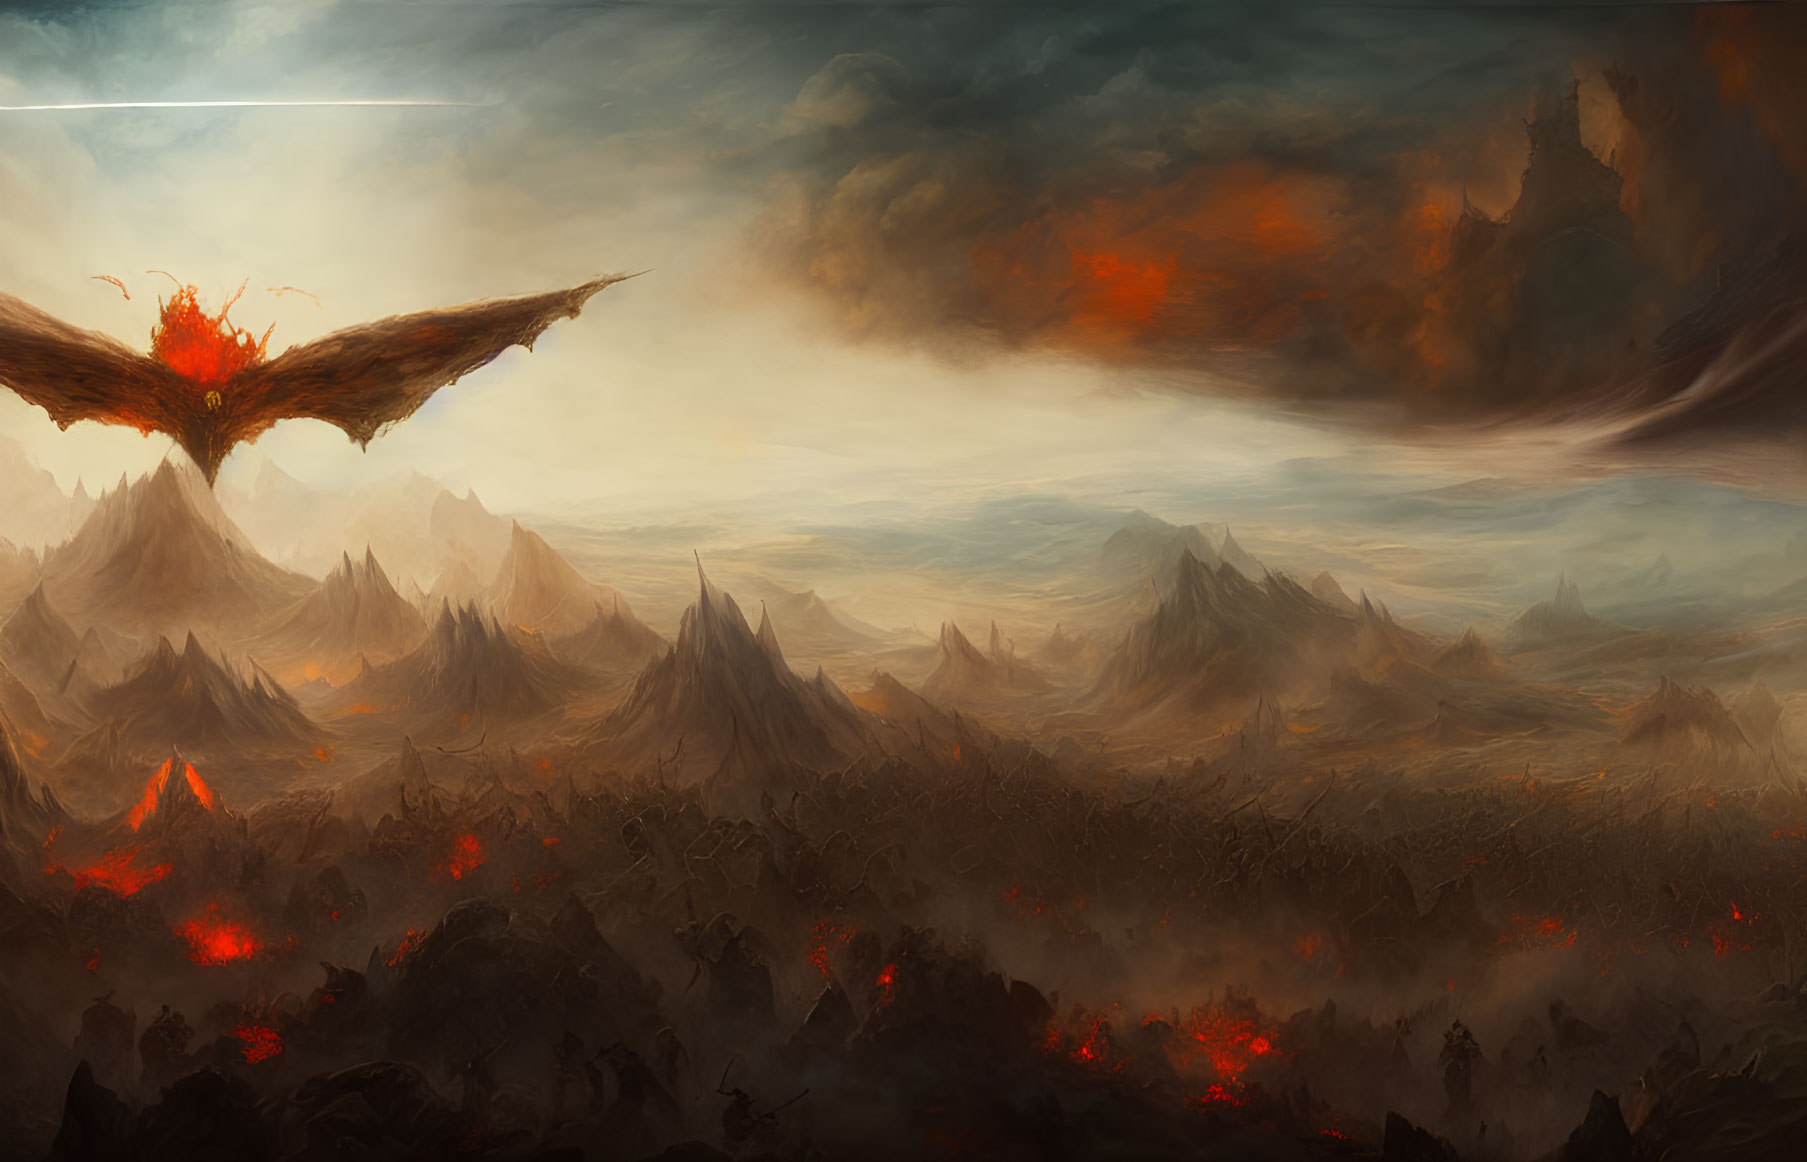 Apocalyptic landscape with fiery peaks and colossal dragon against swirling sky